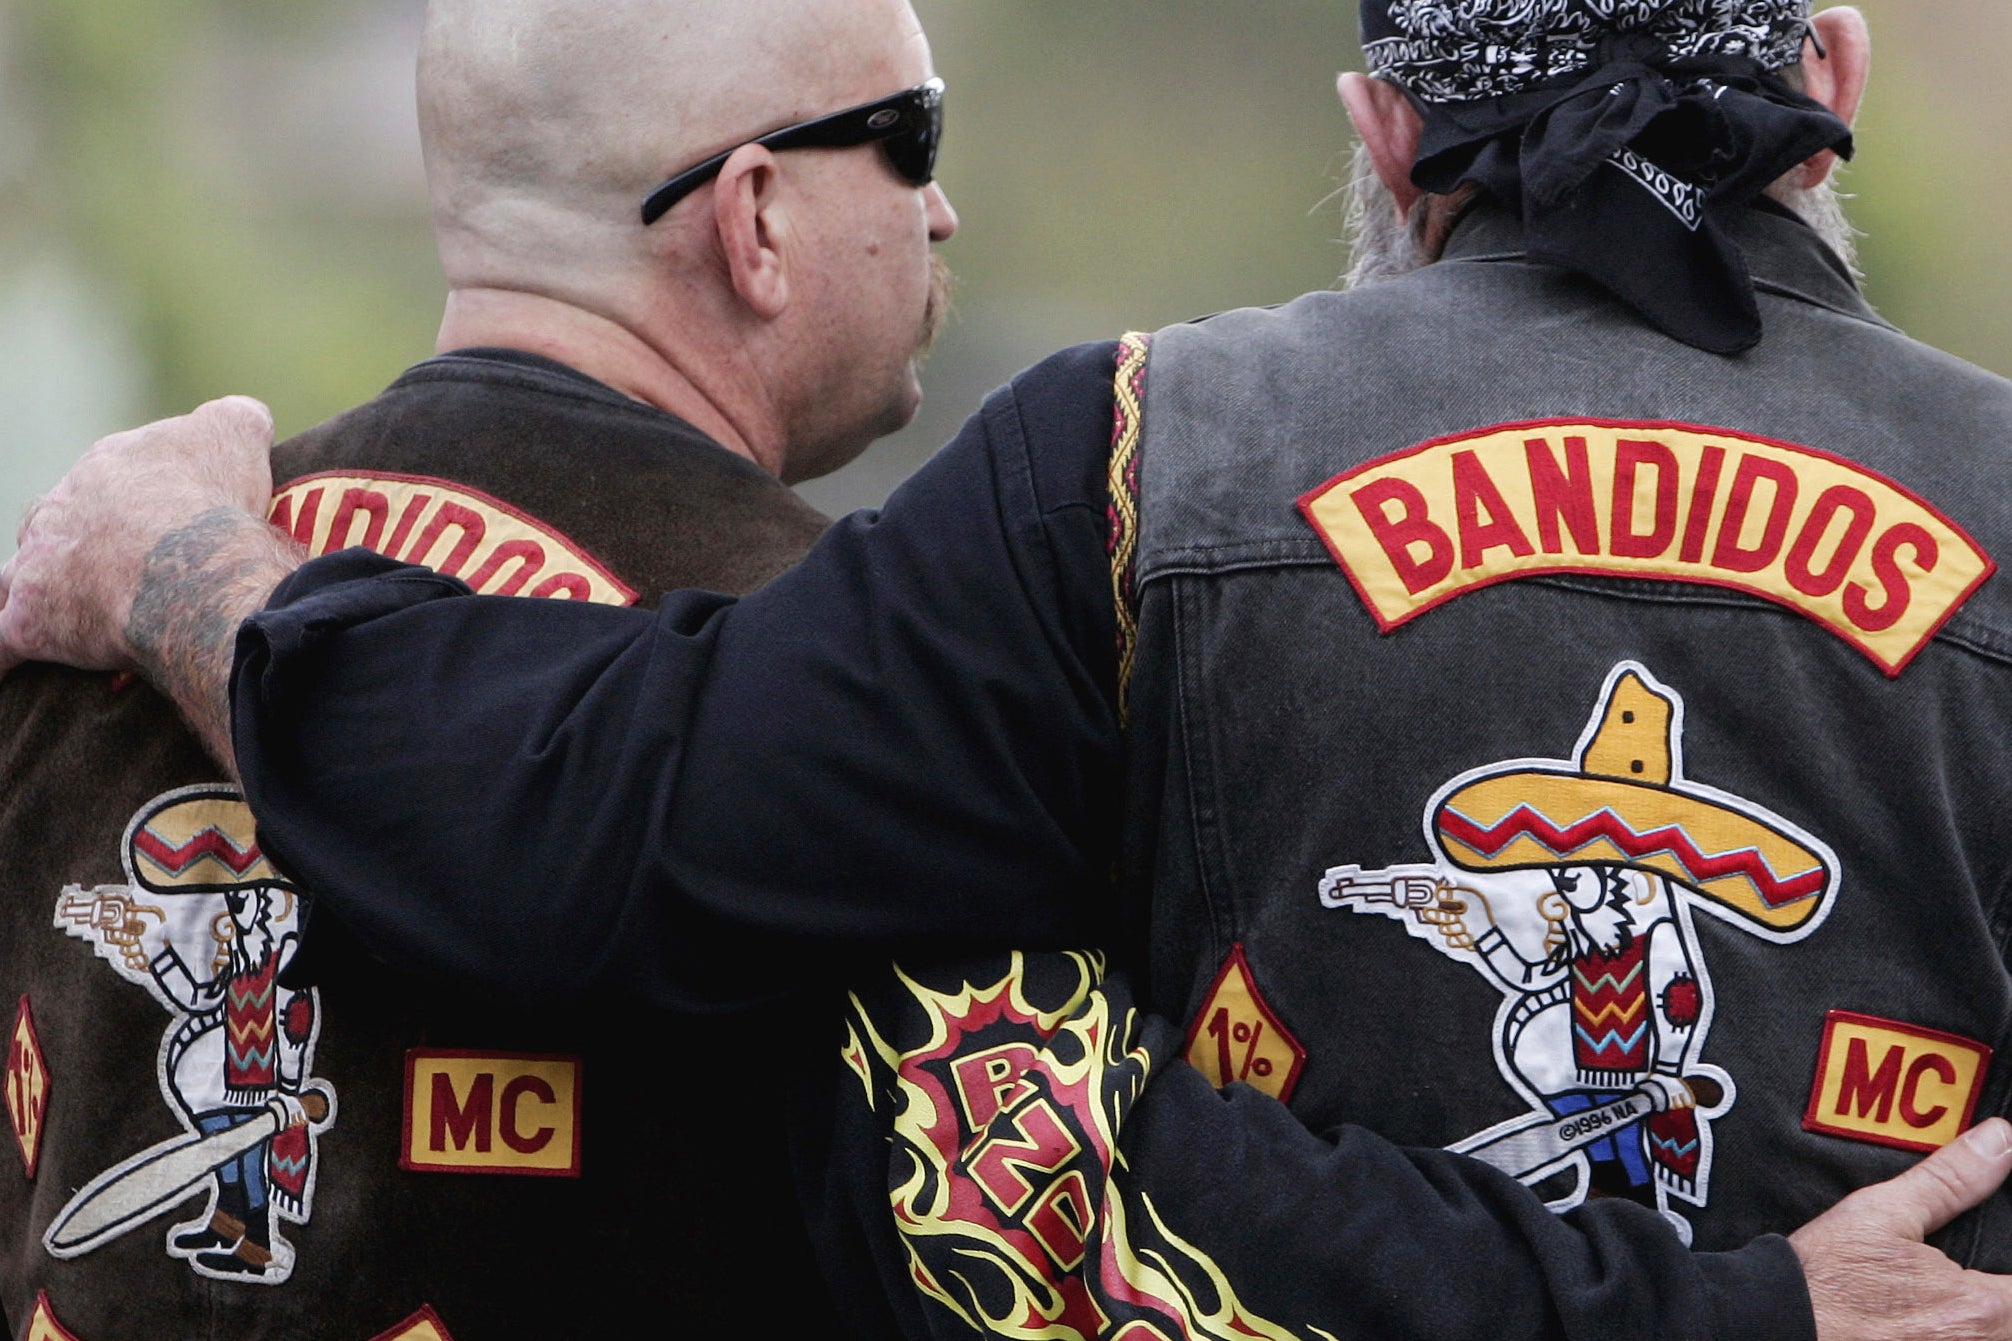 Denmark looks to dissolve Bandidos motorcycle club after trail of ...